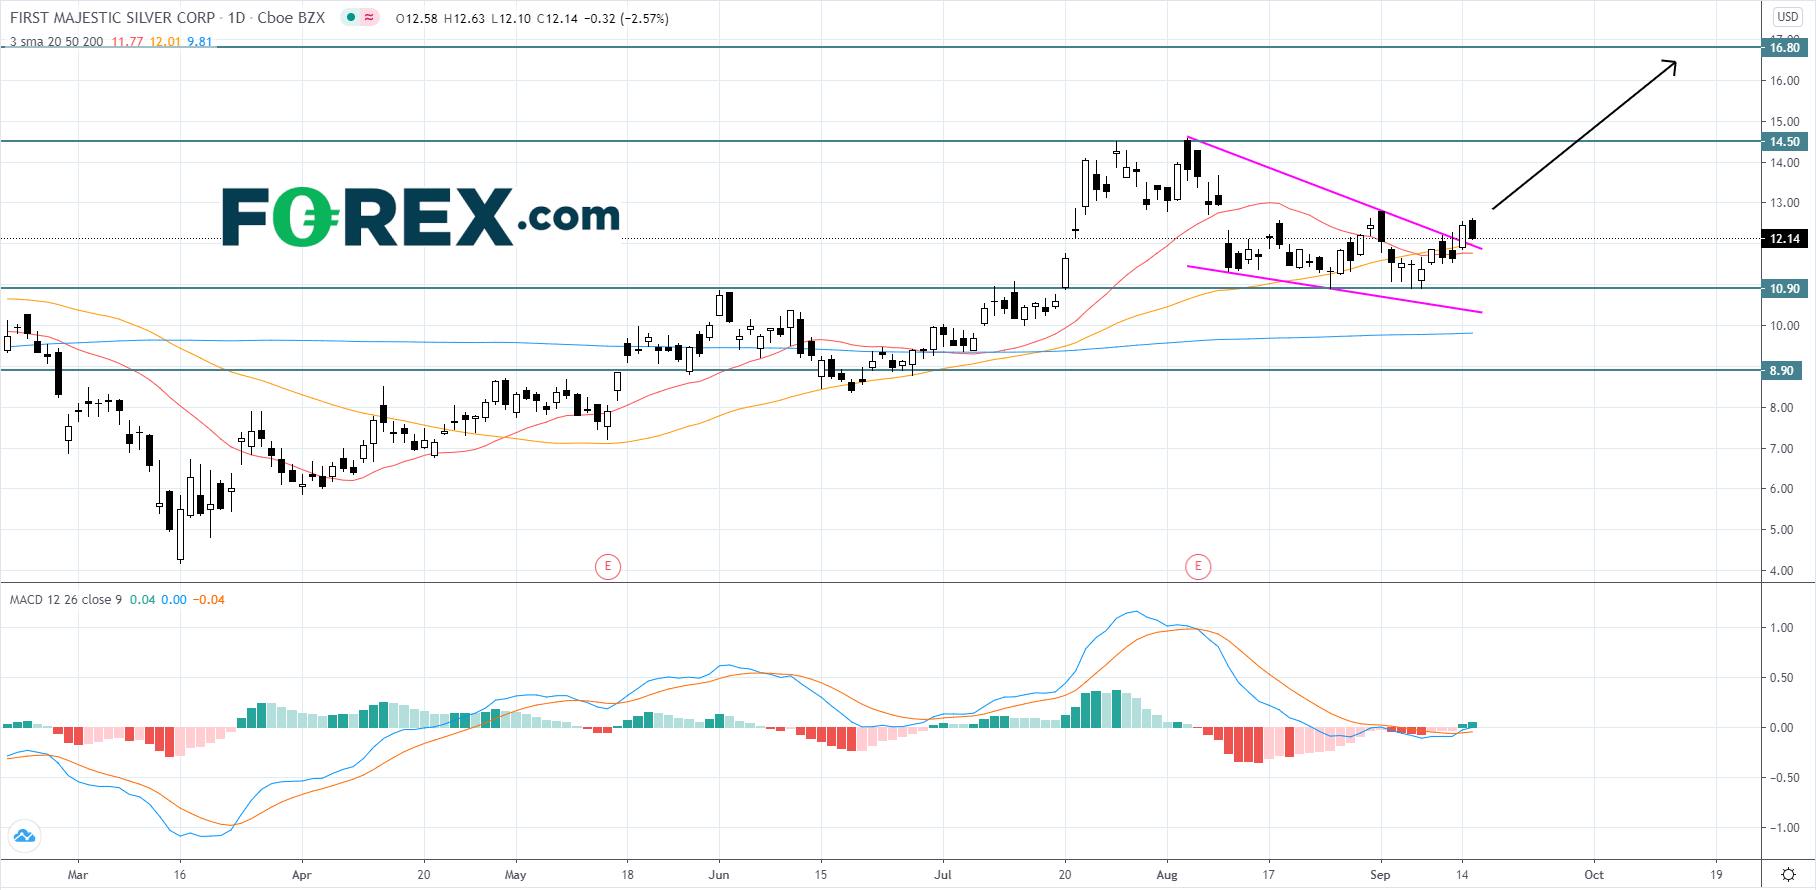 Market chart showing performance of First Majestic Silver corp. Published September 2020 by FOREX.com